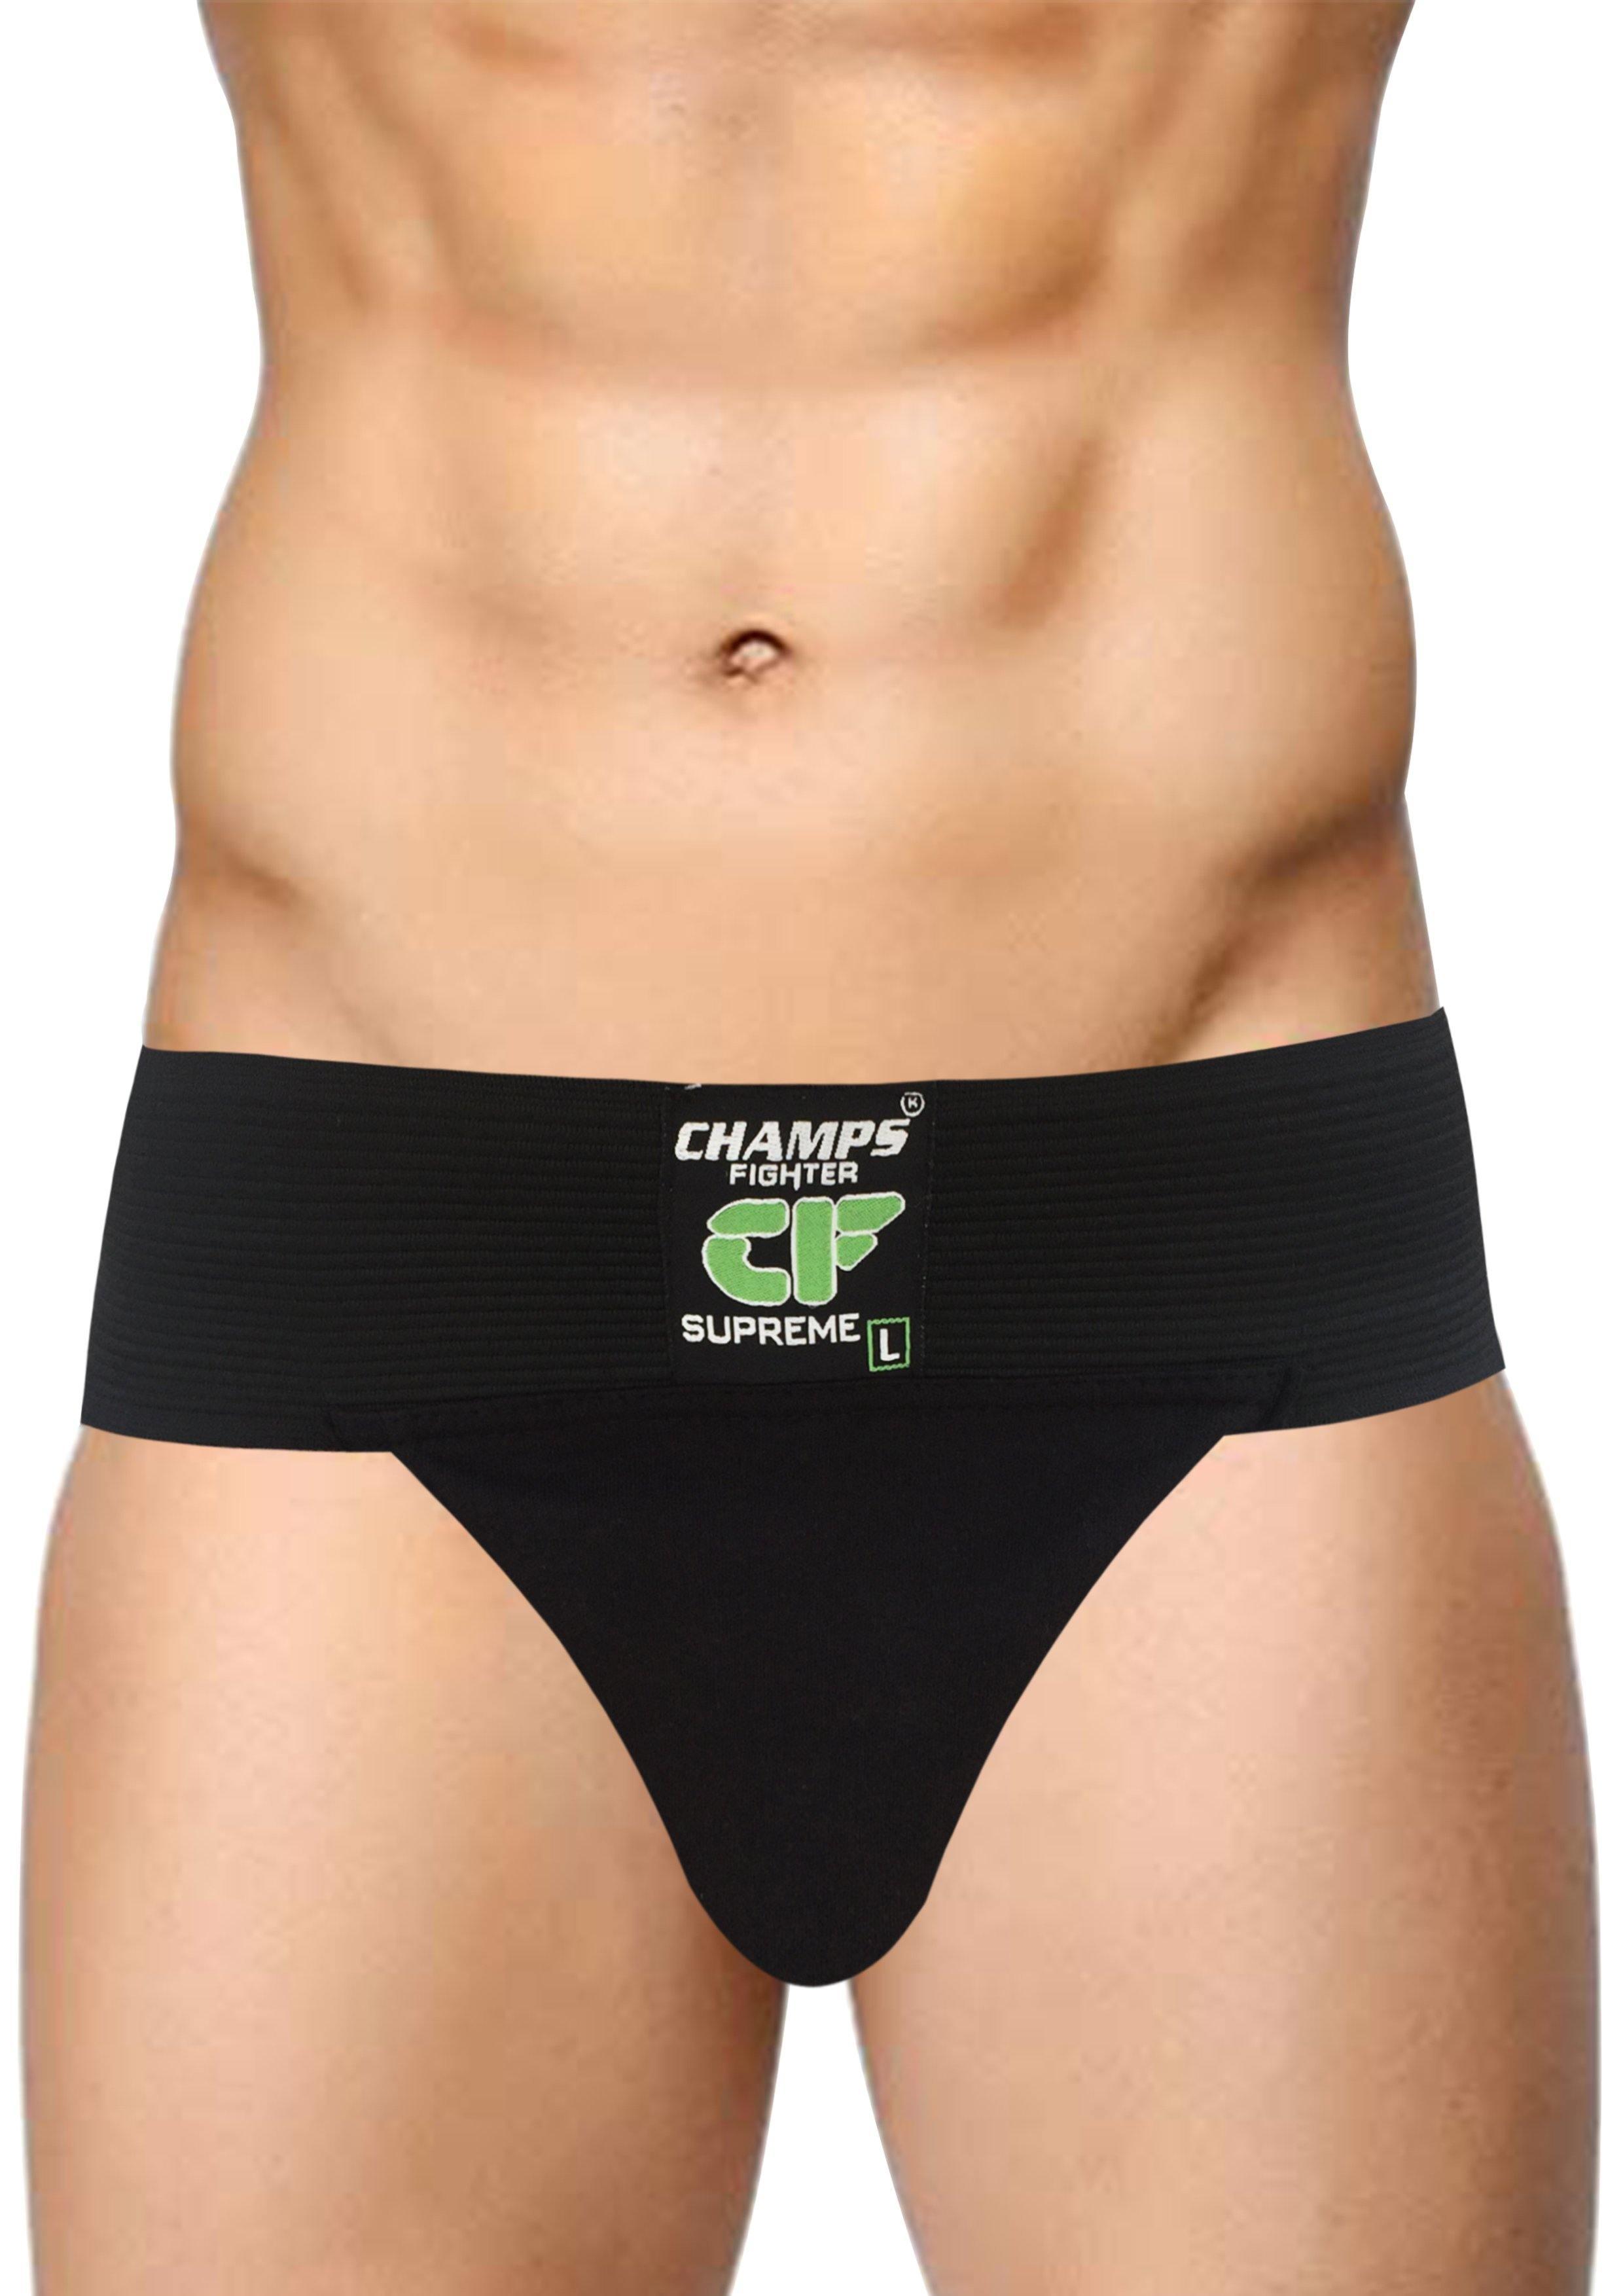 S&C Gym Athletic Cotton Supporter Back Covered & Jockstrap with